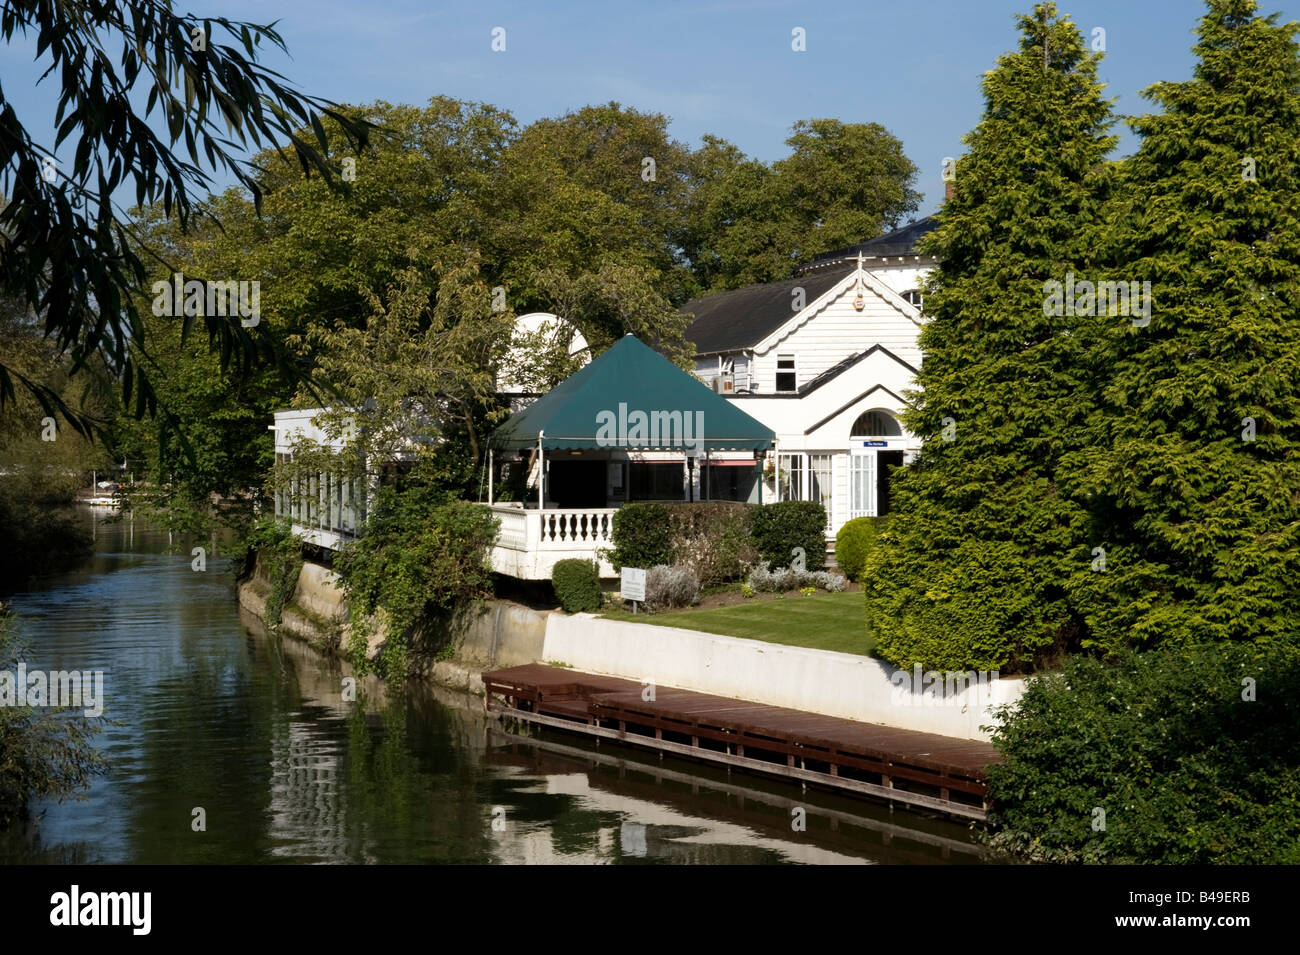 Monkey Island Hotel in Bray on a tiny island on the Thames Stock Photo